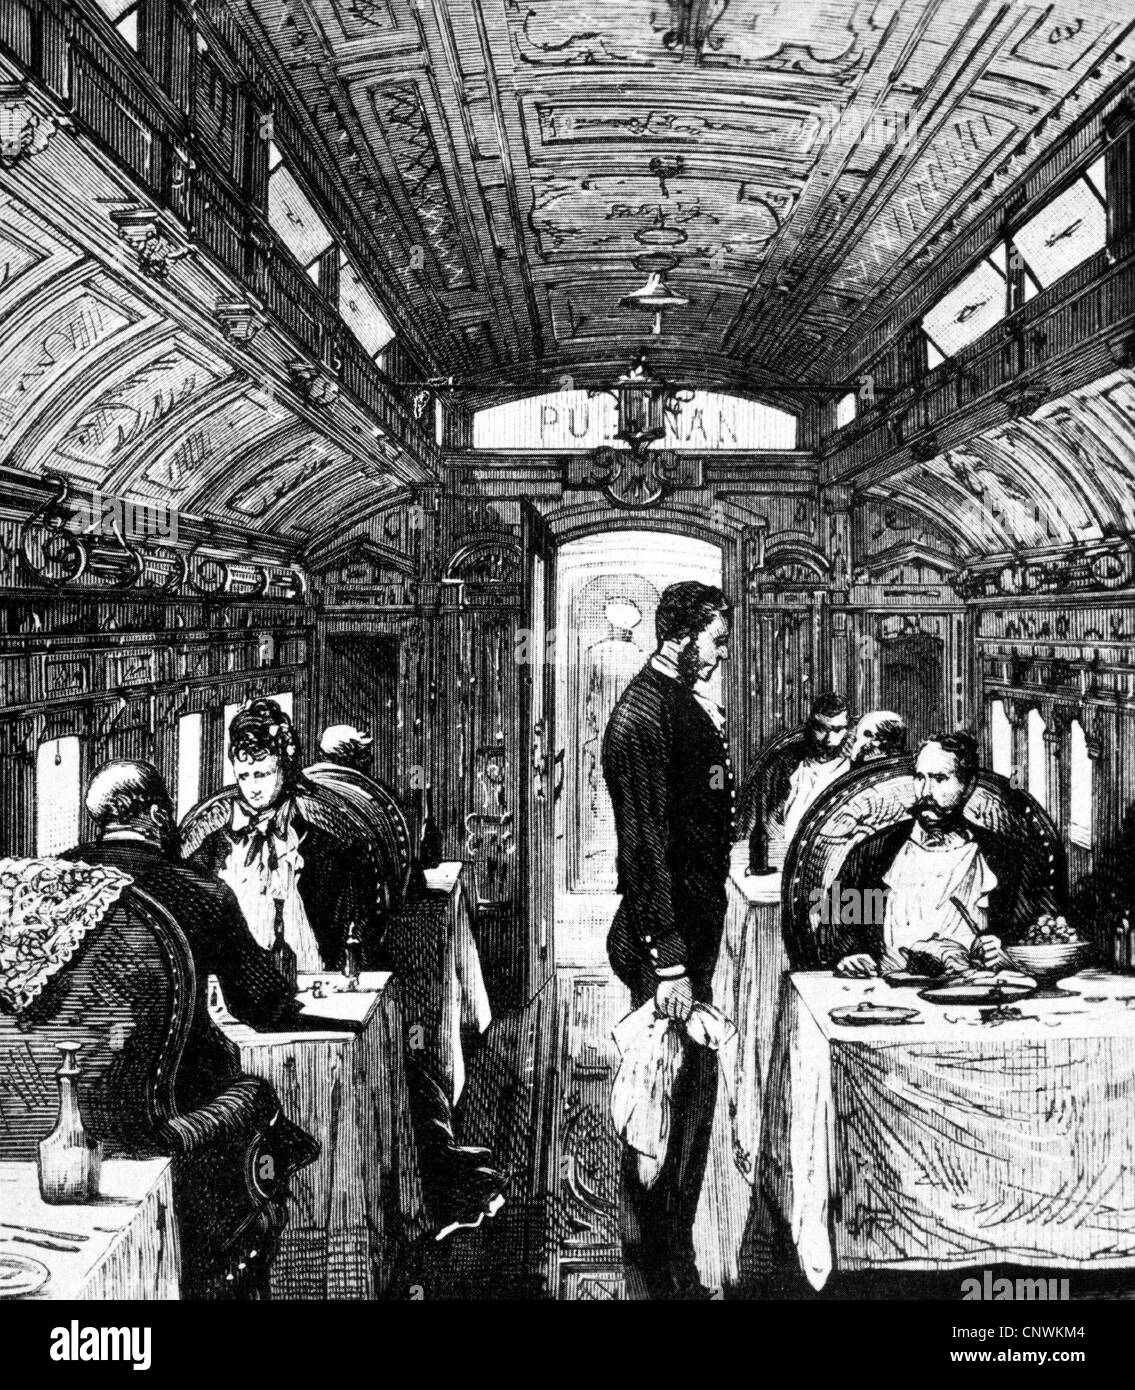 transport / transportation, railway, Pullman dining car, interior view, wood engraving, 1880, Additional-Rights-Clearences-Not Available Stock Photo